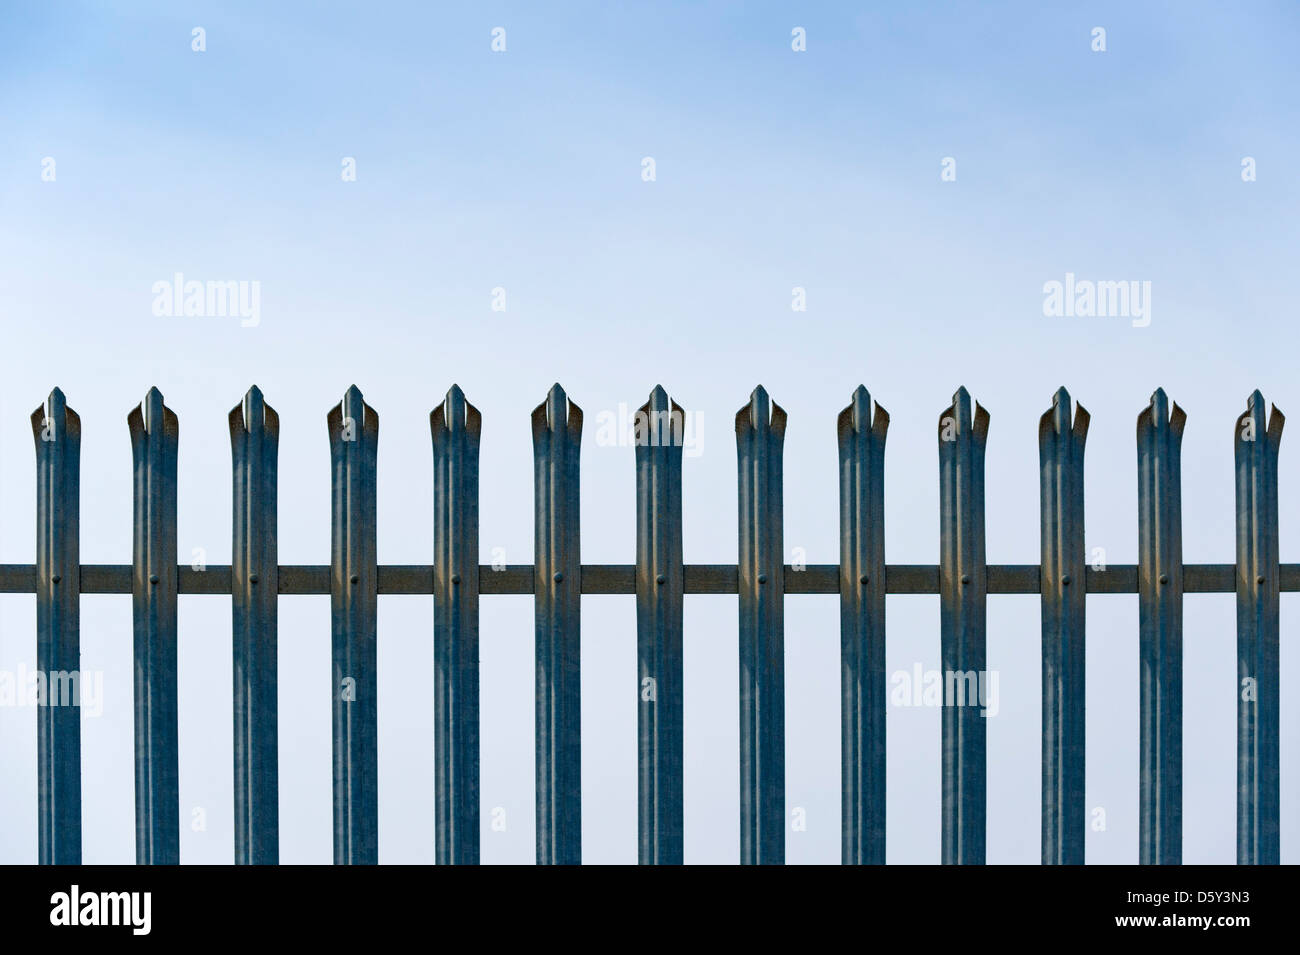 Security Metal Fence Against a blue sky Stock Photo